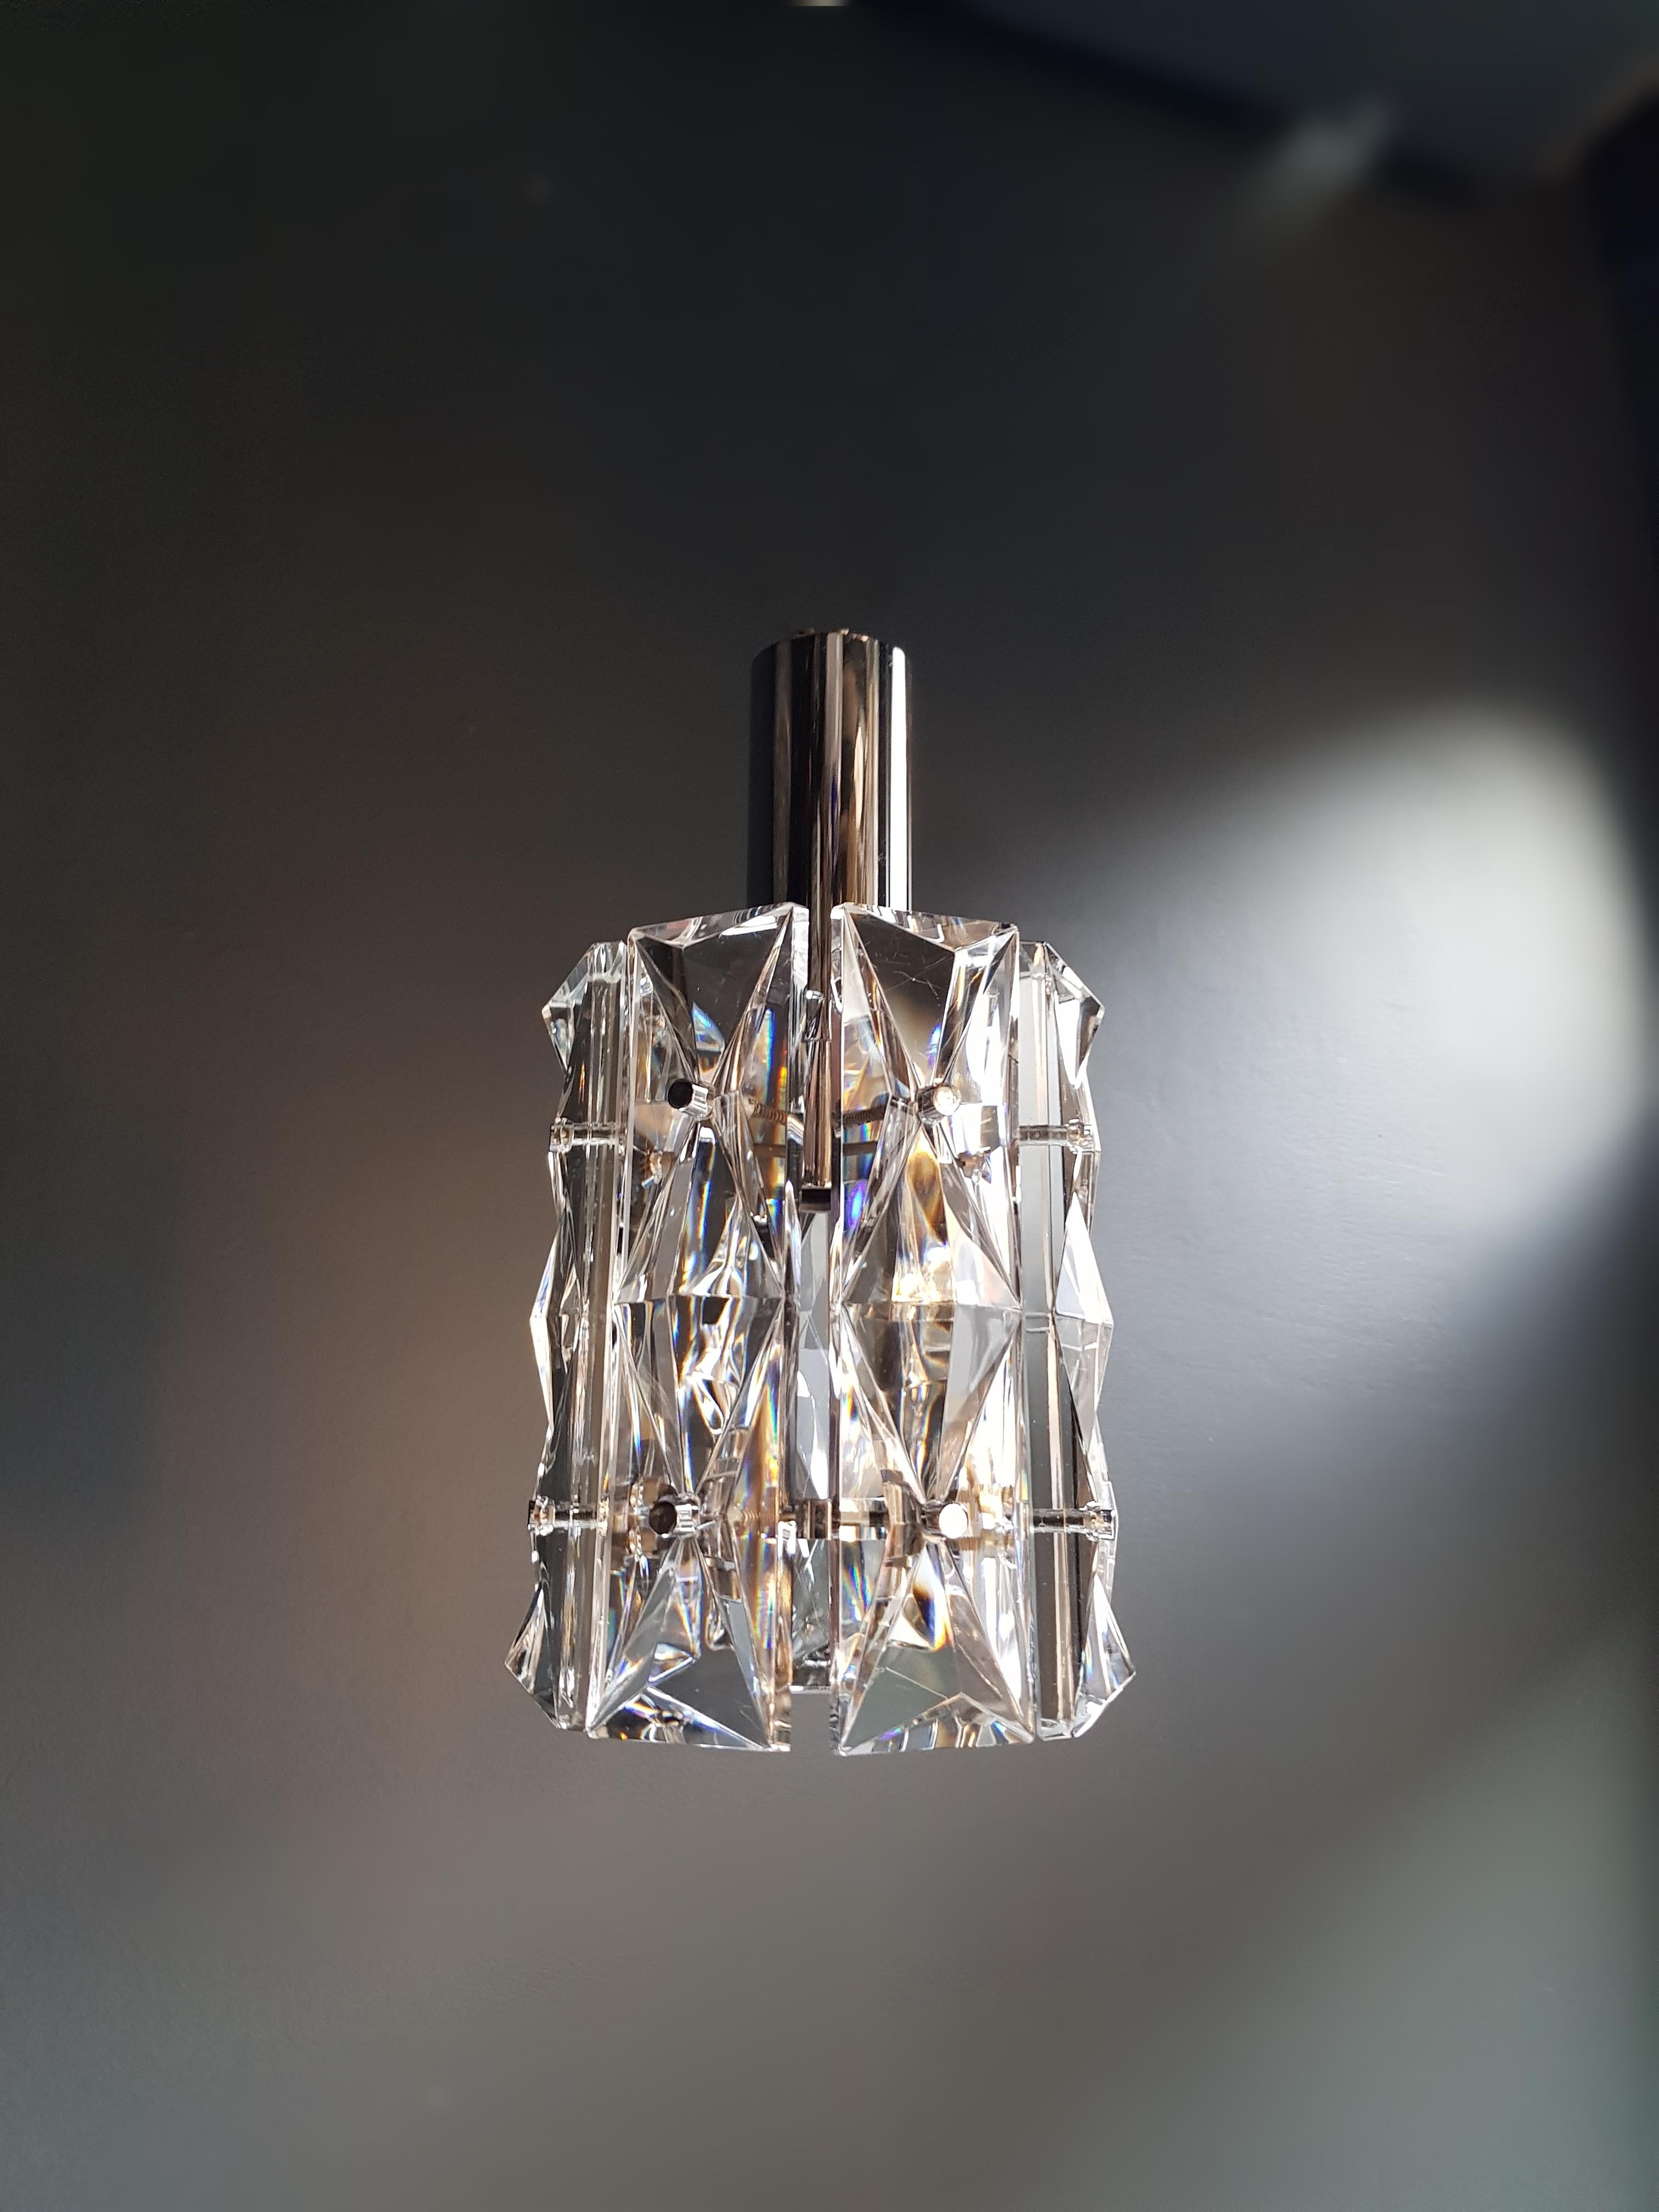 Chrome crystal glass chandelier lamp by Kinkeldey, Germany, 1970s.

Measures: Total height 33 cm, diameter 16 cm. Weight (approximately): 1 kg.

Number of lights: 1 x bulb sockets: E27

PAT tested. Ready to hang.

Chrome crystal glass